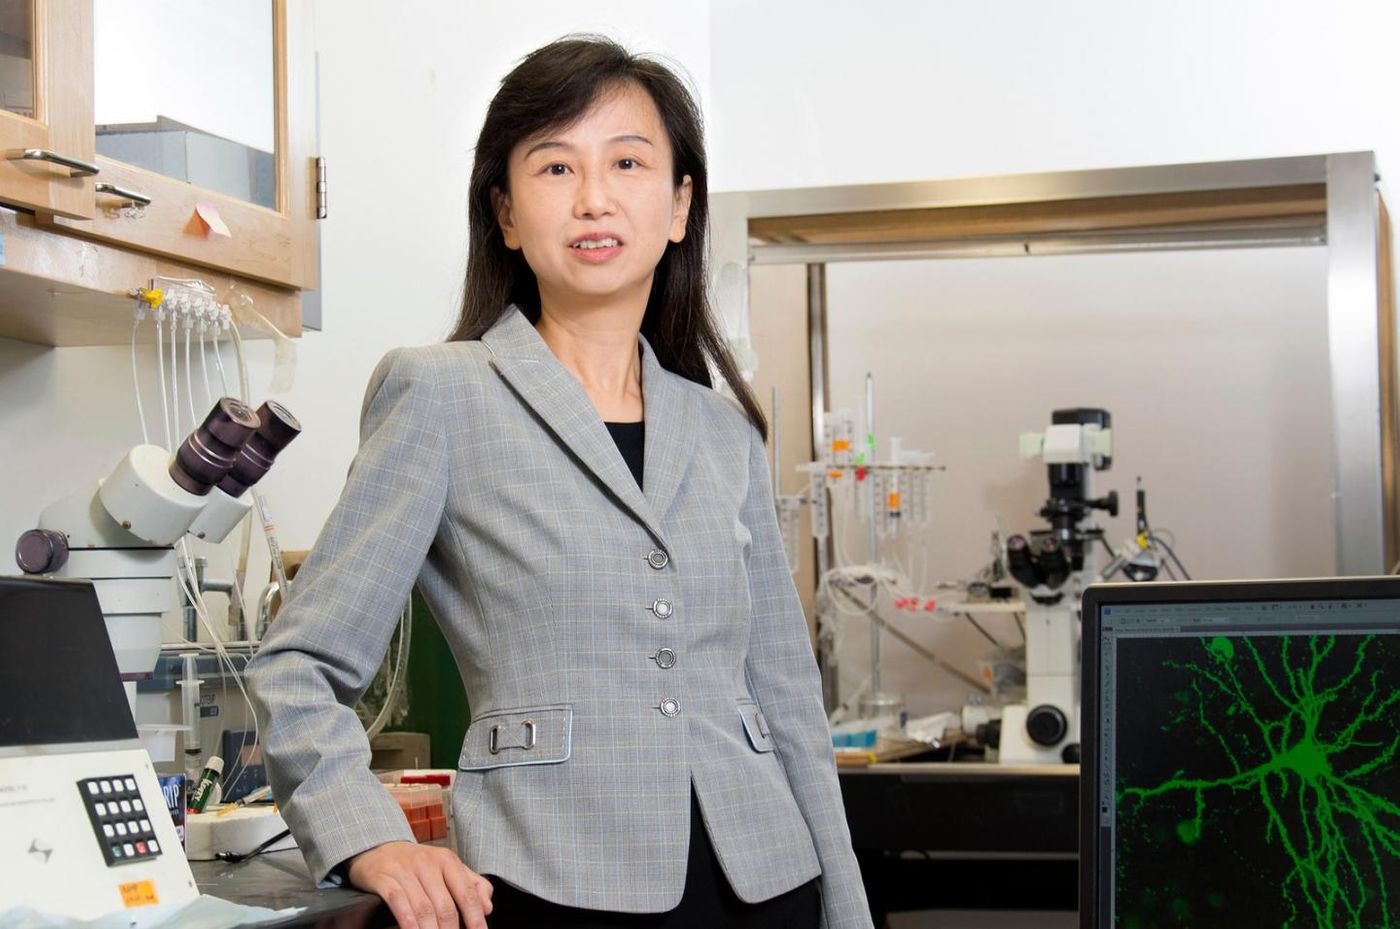 Zhen Yan, PhD, professor, Department of Physiology and Biophysics, has founded a startup company based on the promising results. / Credit: Sandy Kicman/University at Buffalo